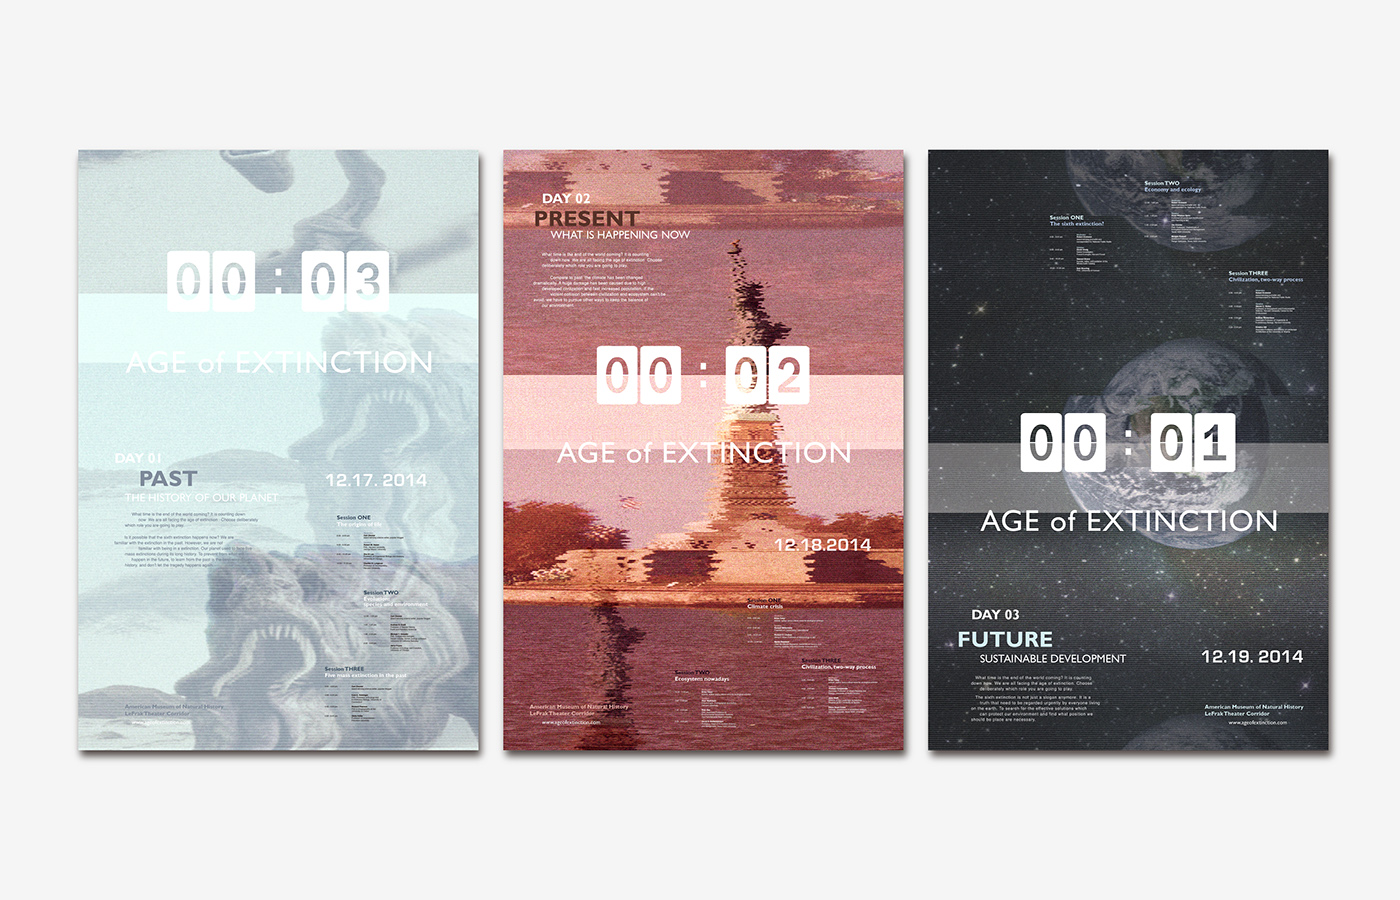 art direction pratt poster logo UI user interface Website Visual Communication Extinction environmental protection conservation Sustainability conference